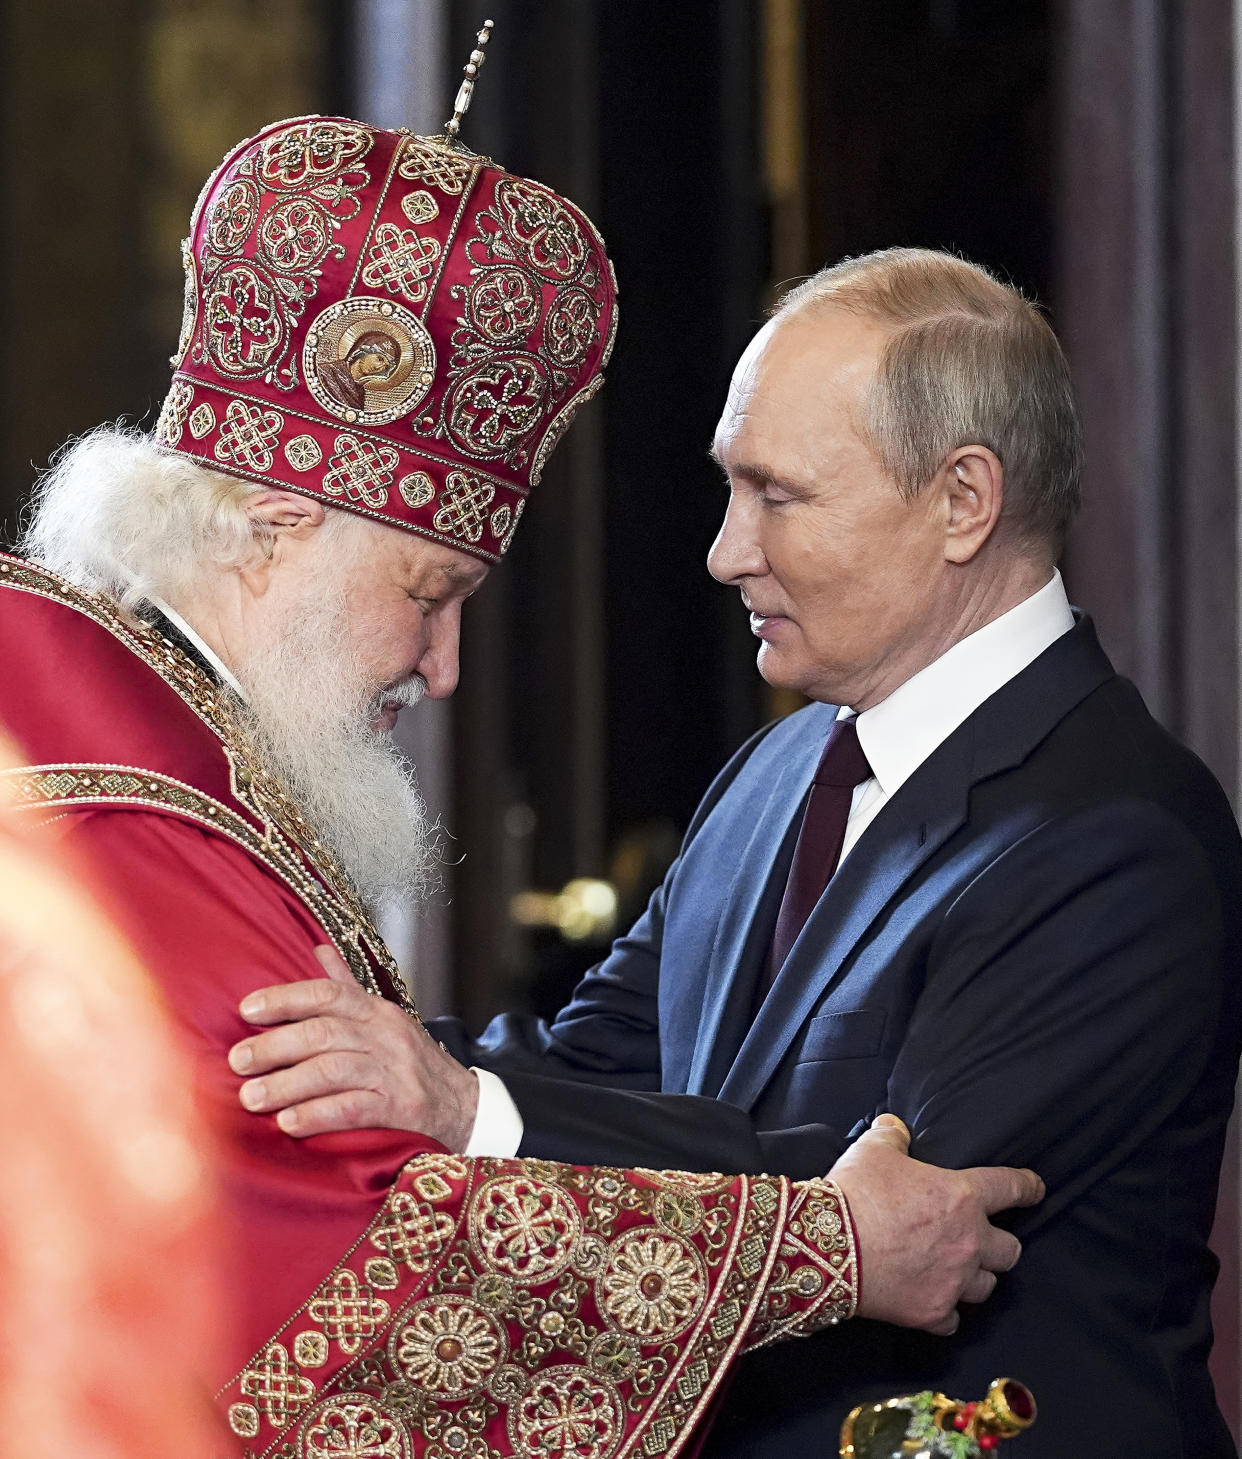 Russian President Vladimir Putin reaches out to put both hands warmly on Patriarch Kirill, who is wearing red robes and miter, and bows his head in a gesture of acknowledgment.